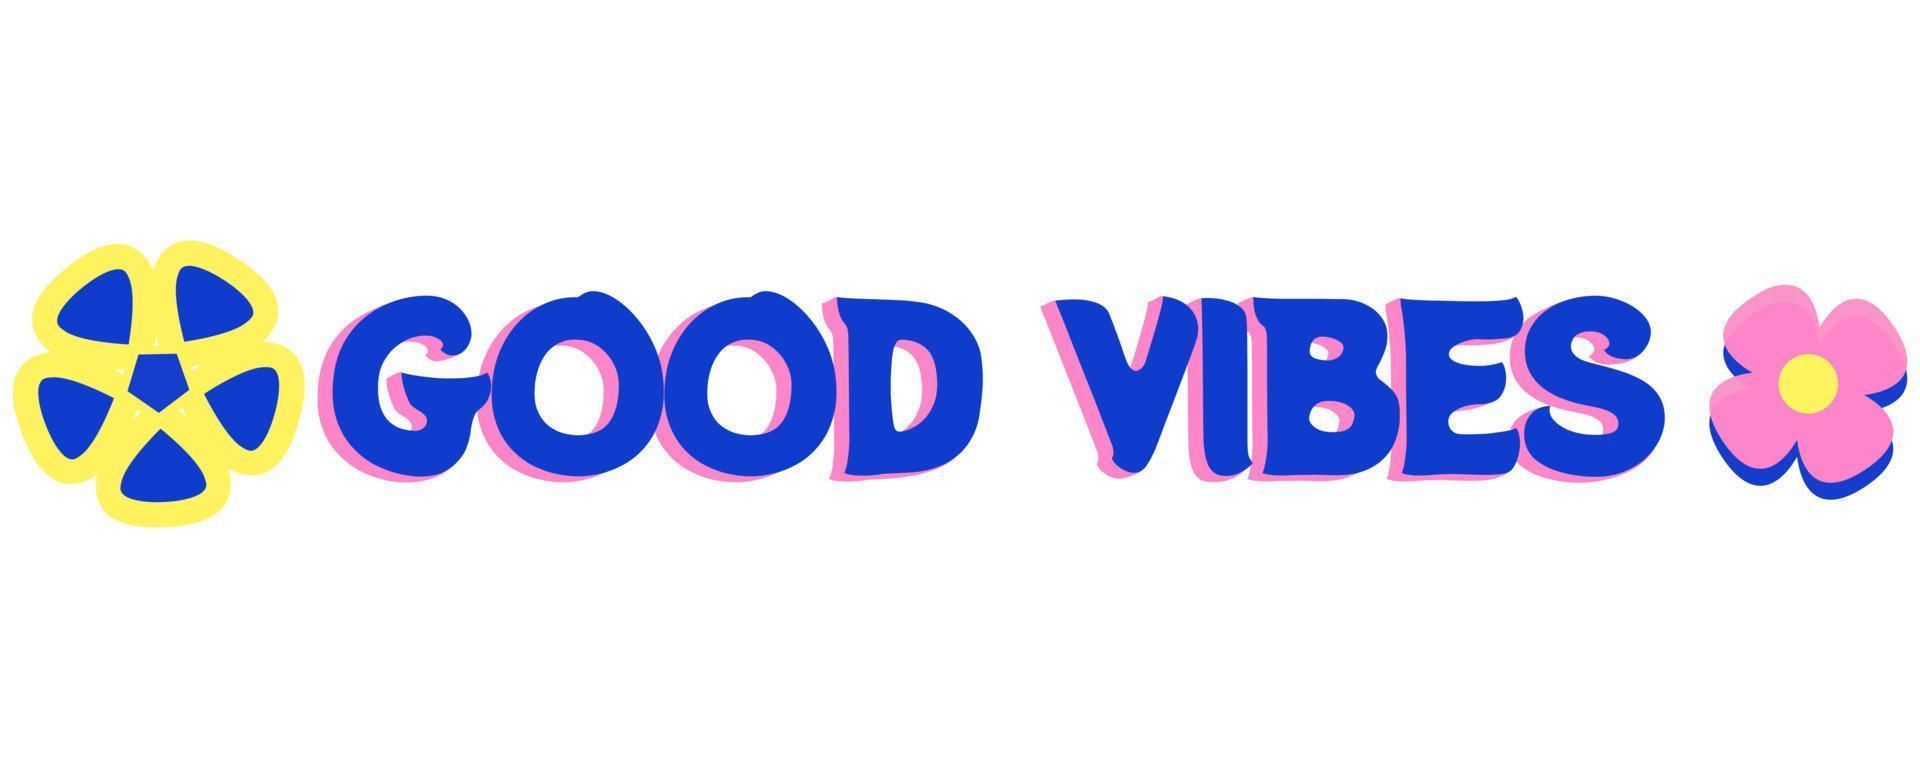 Motivational Stickers about Good Vibes. Letters Quotes with deep blue color - good vibes stickers vector